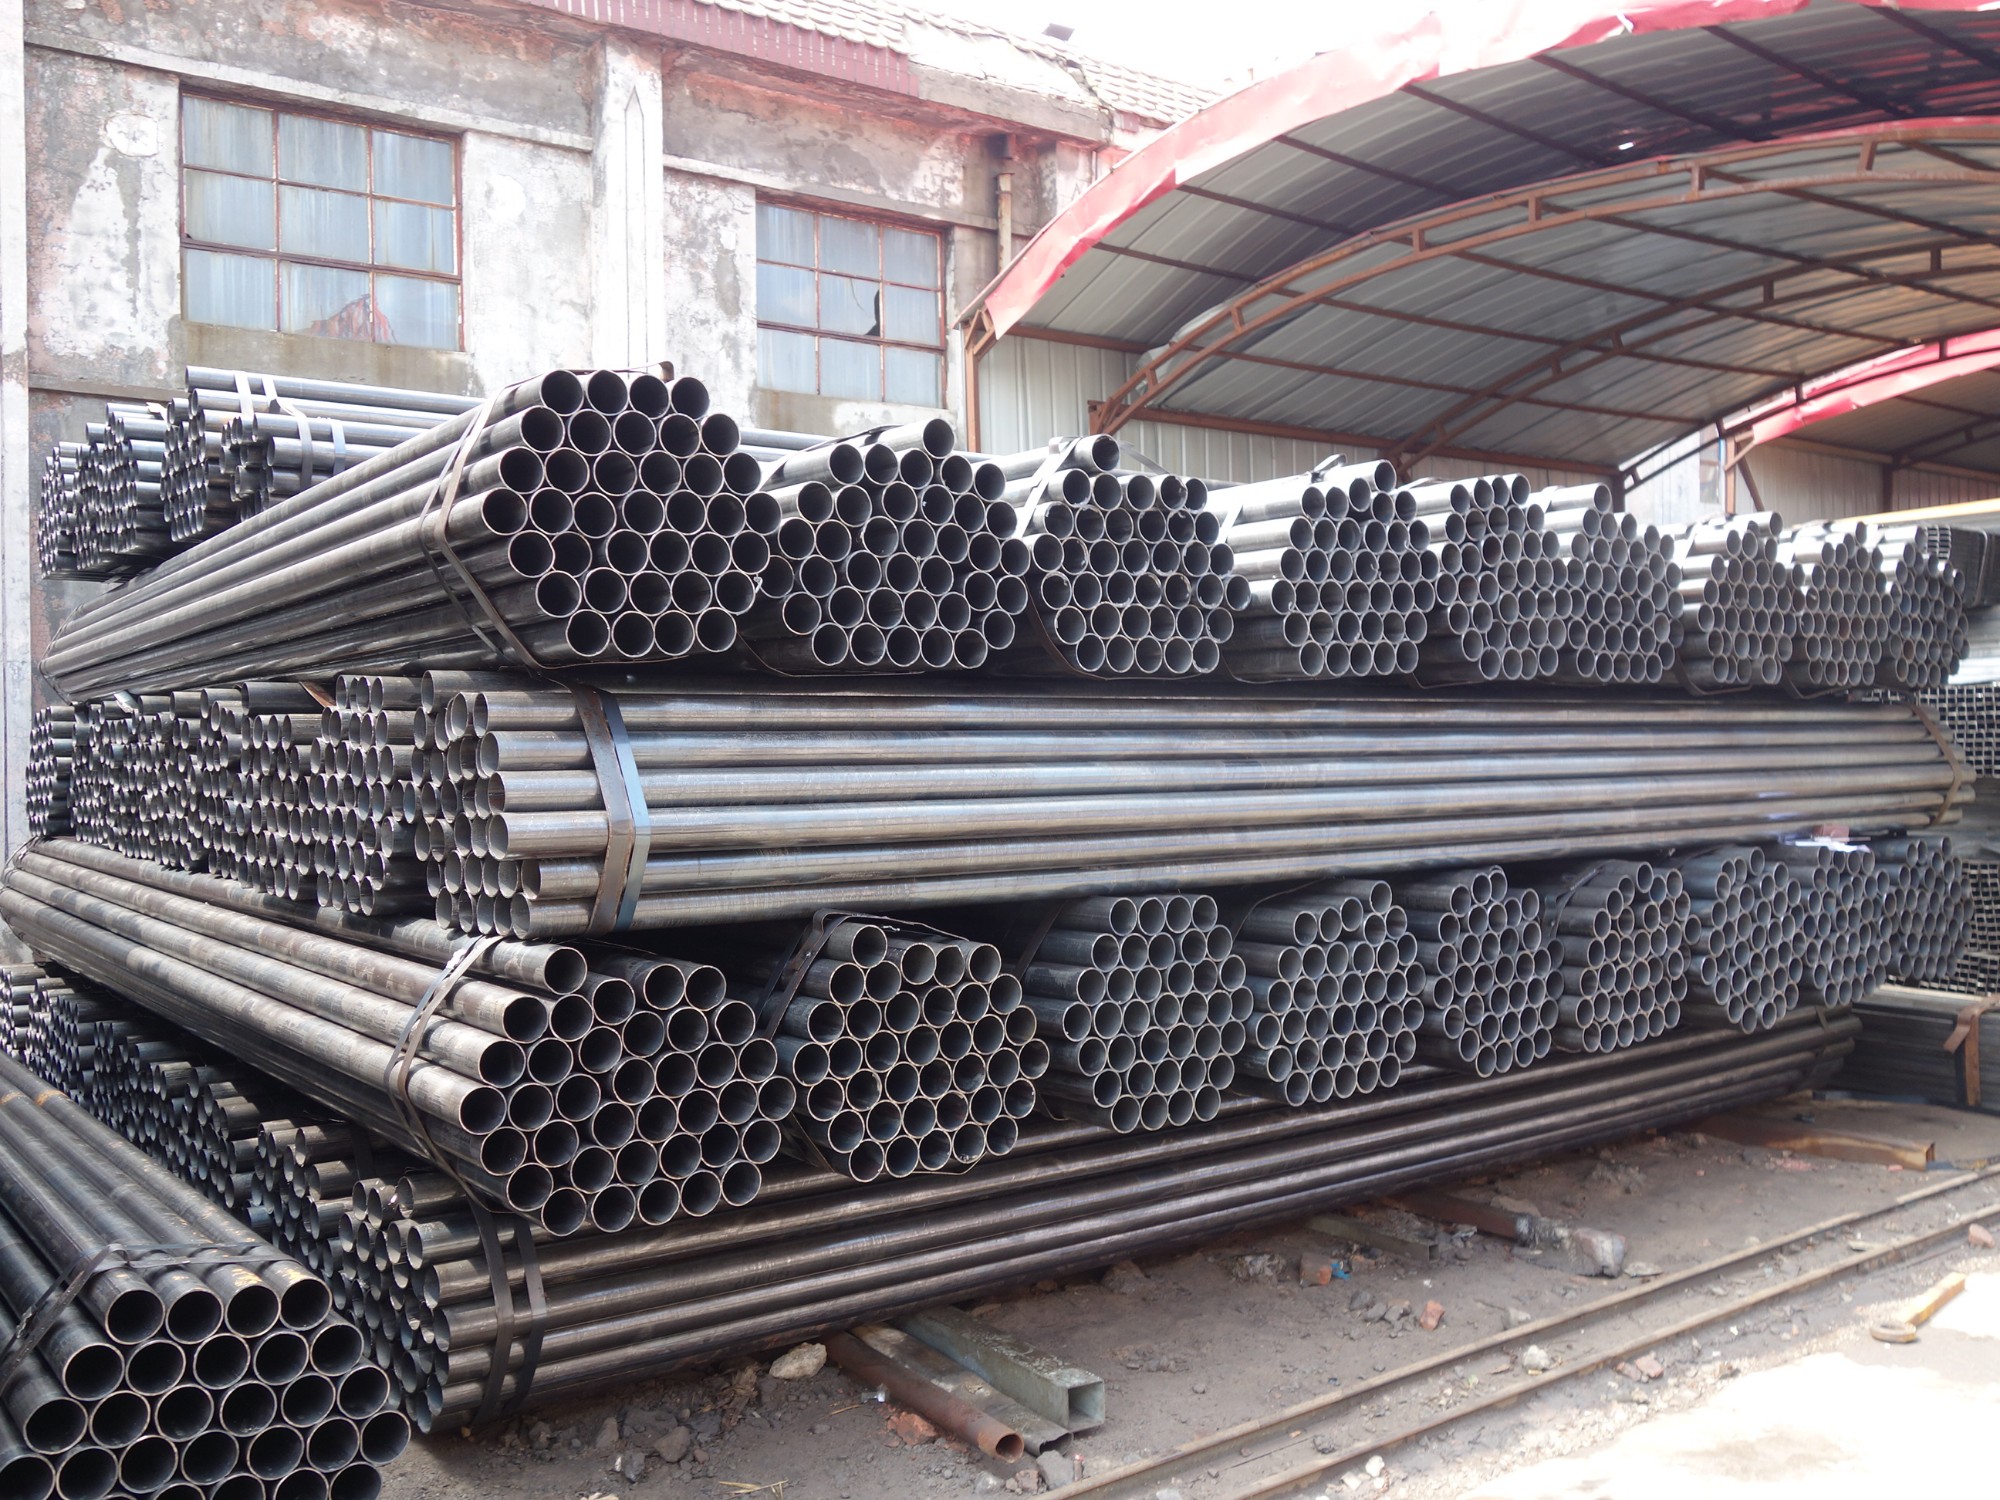 Hot Rolled Pipes Manufacturers, Hot Rolled Pipes Factory, Supply Hot Rolled Pipes